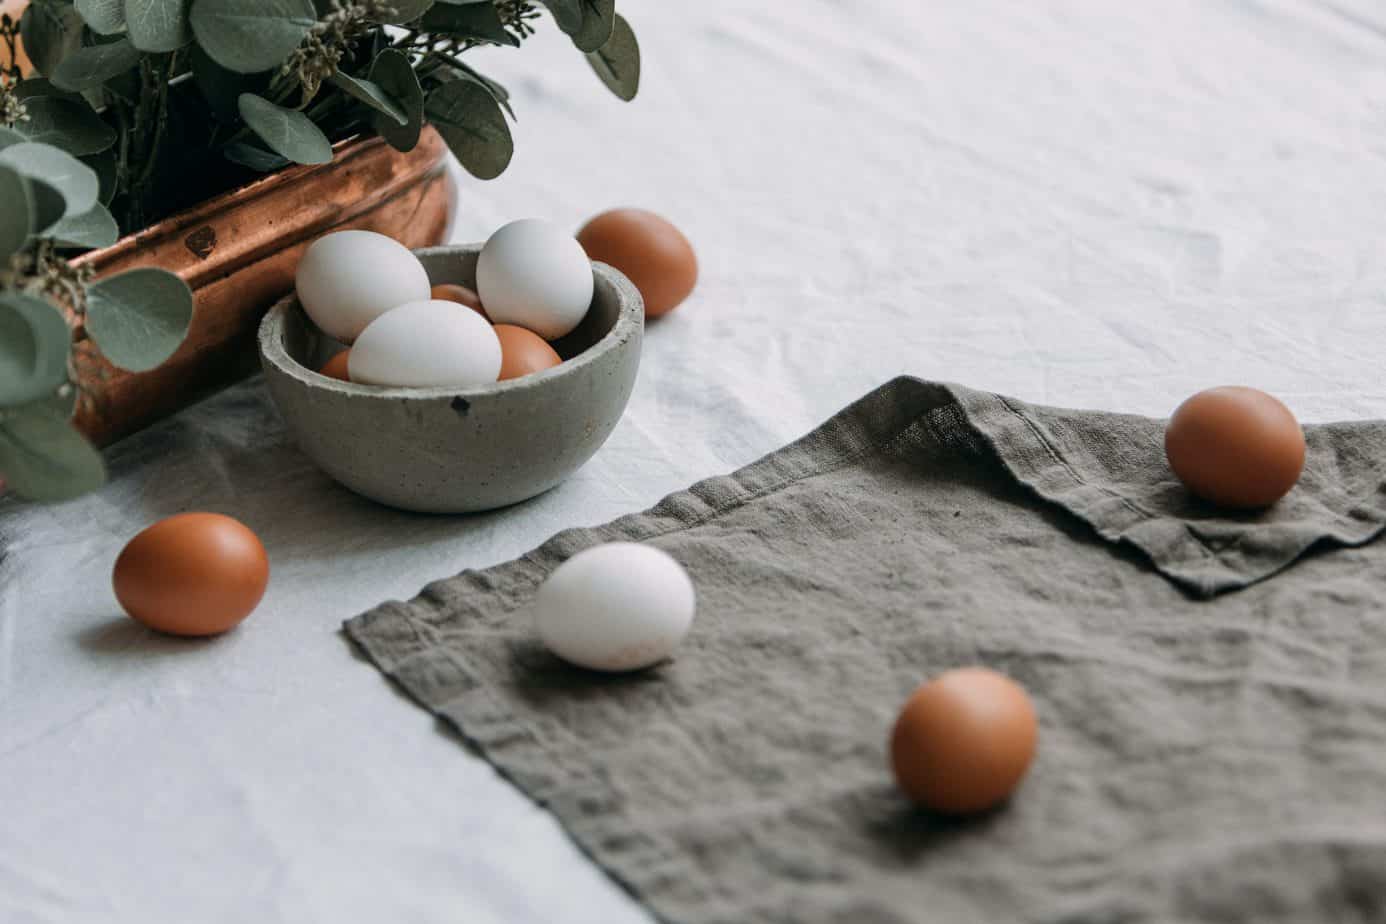 How to cook hard boiled and soft boiled eggs?